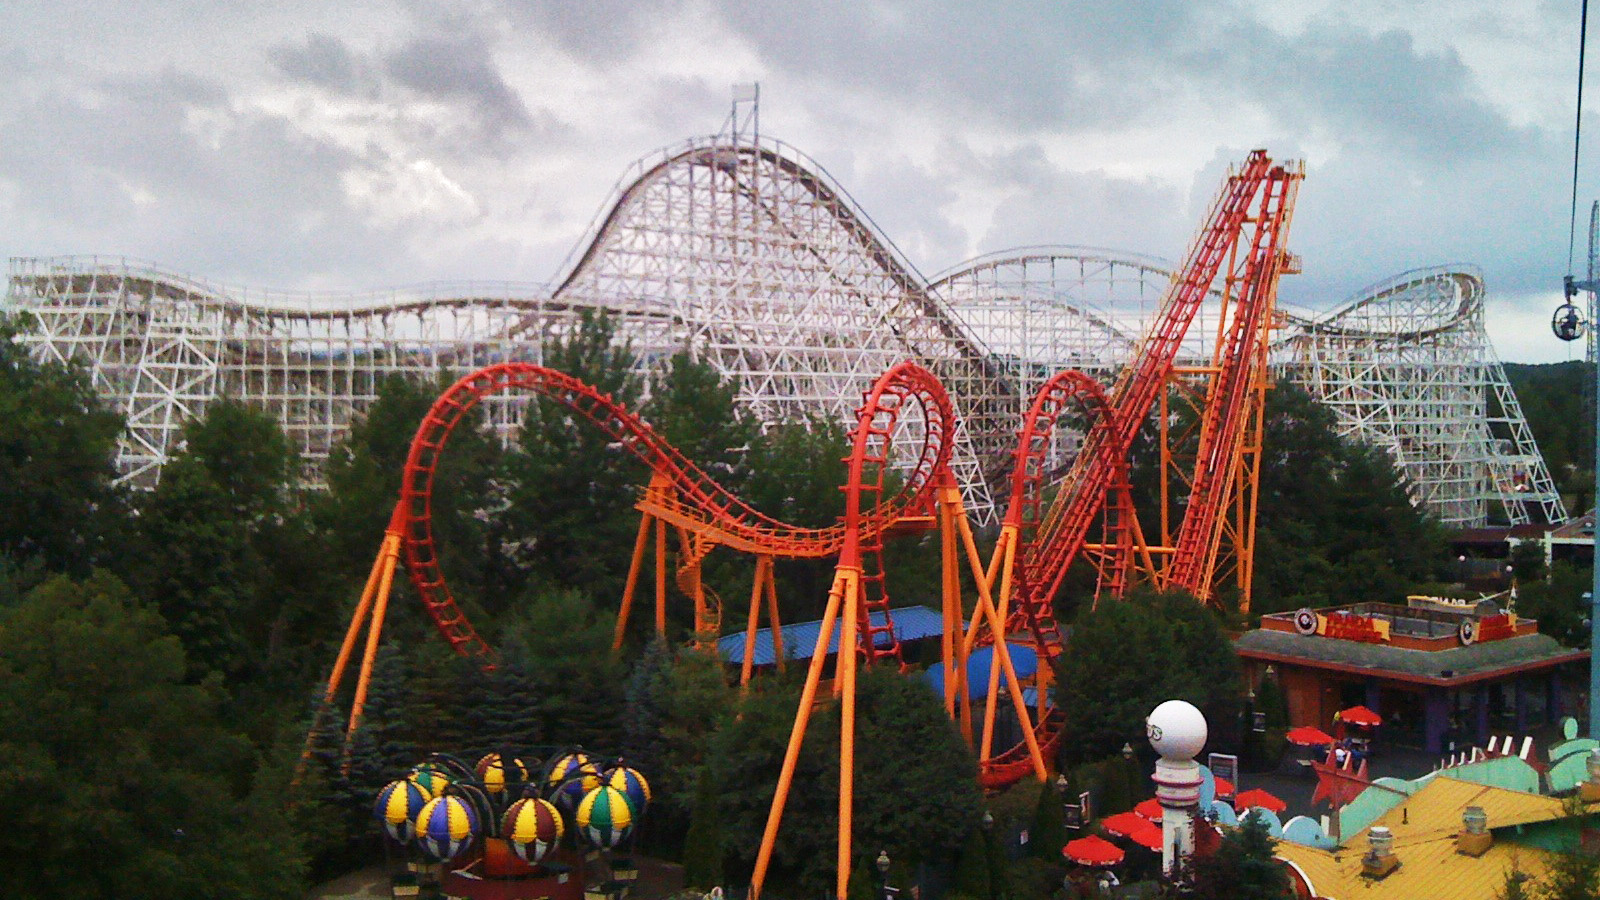 Unofficial On-Line Guide to Six Flags New England - Tickets, Maps, Parking, Rides and More